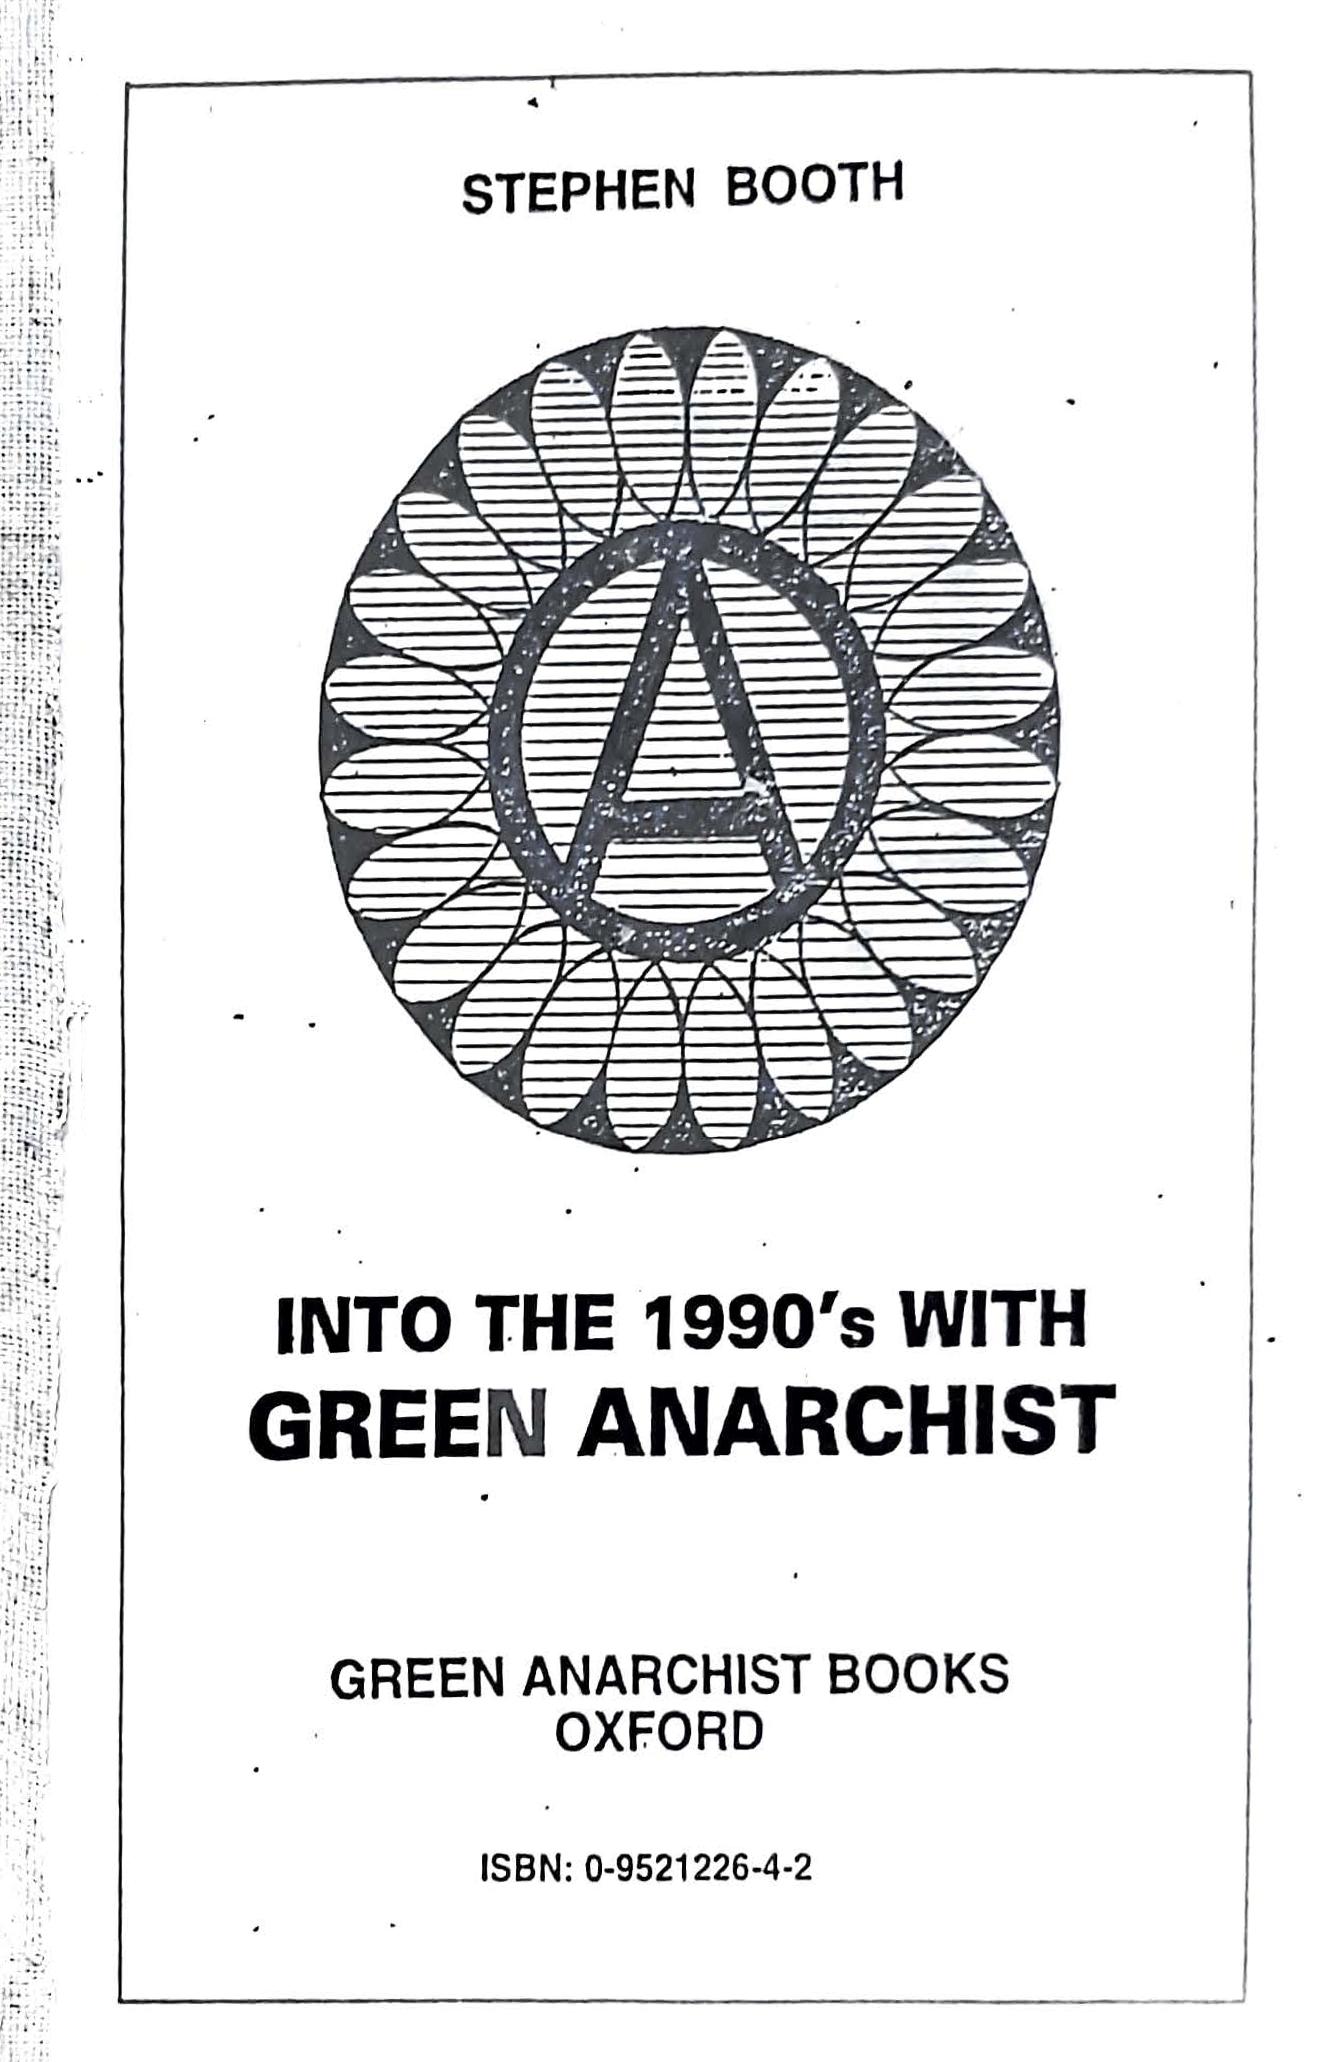 s-b-steve-booth-into-the-1990-s-with-green-anarchi-1.jpg